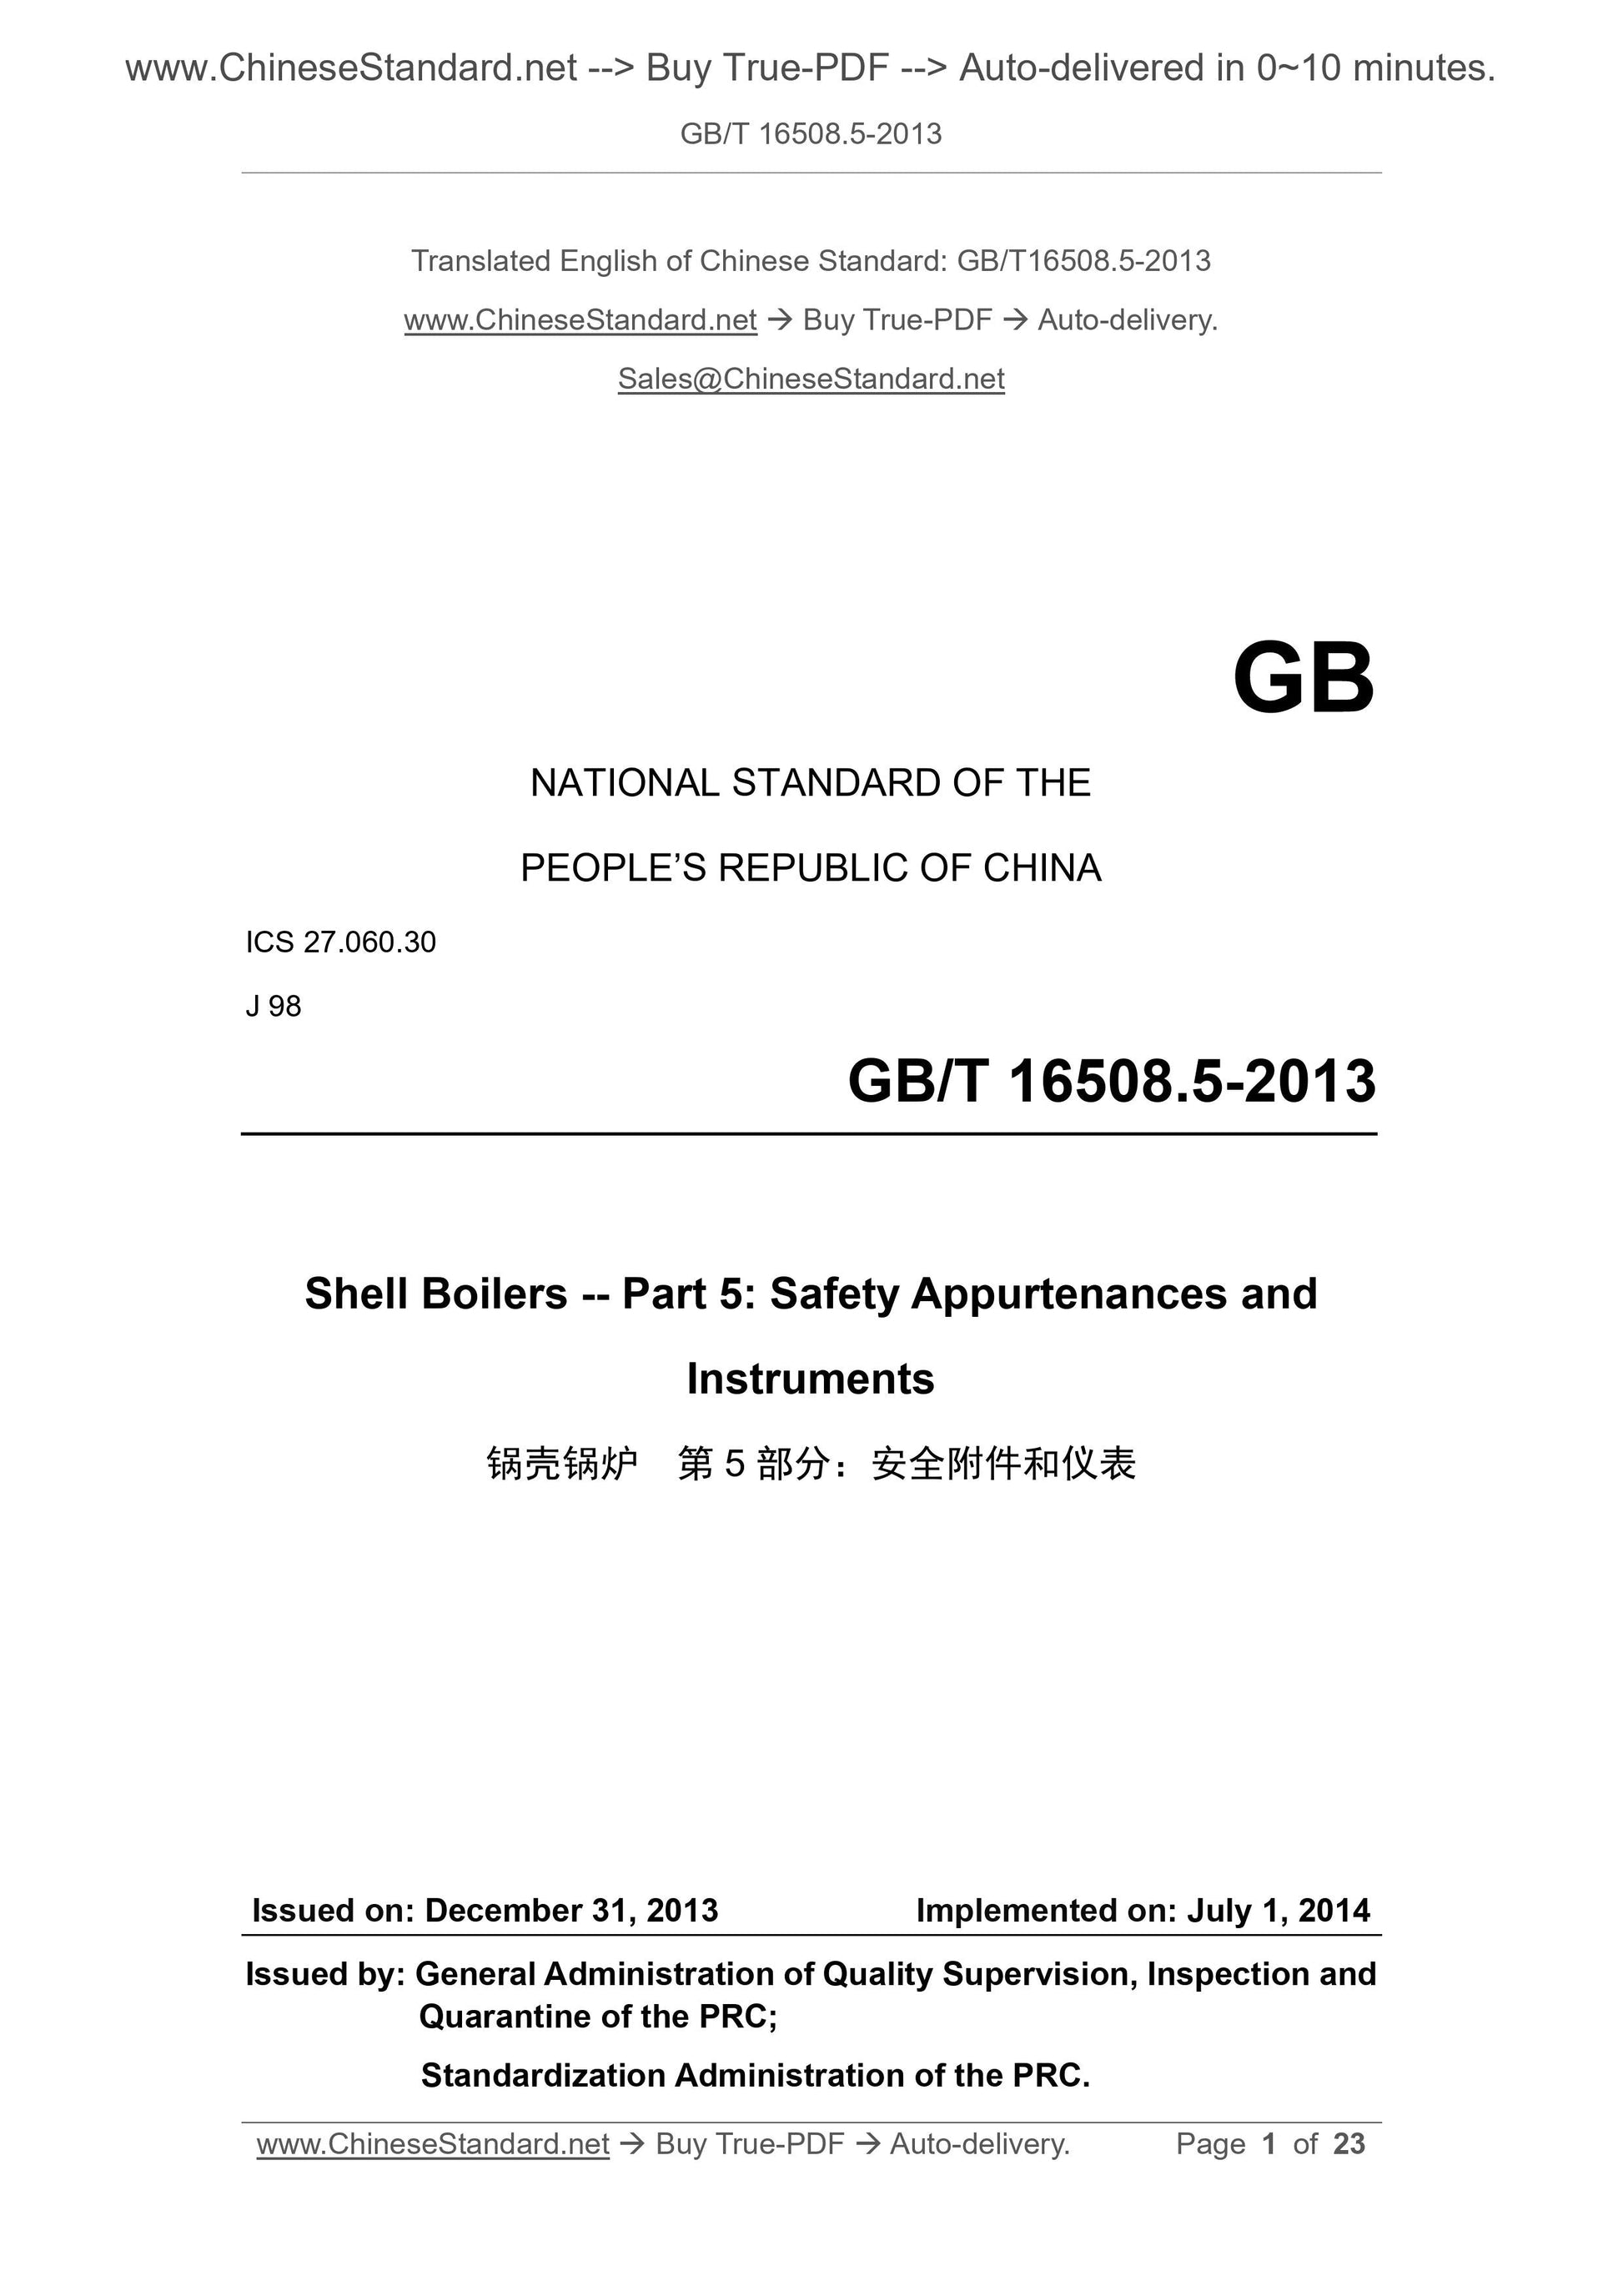 GB/T 16508.5-2013 Page 1